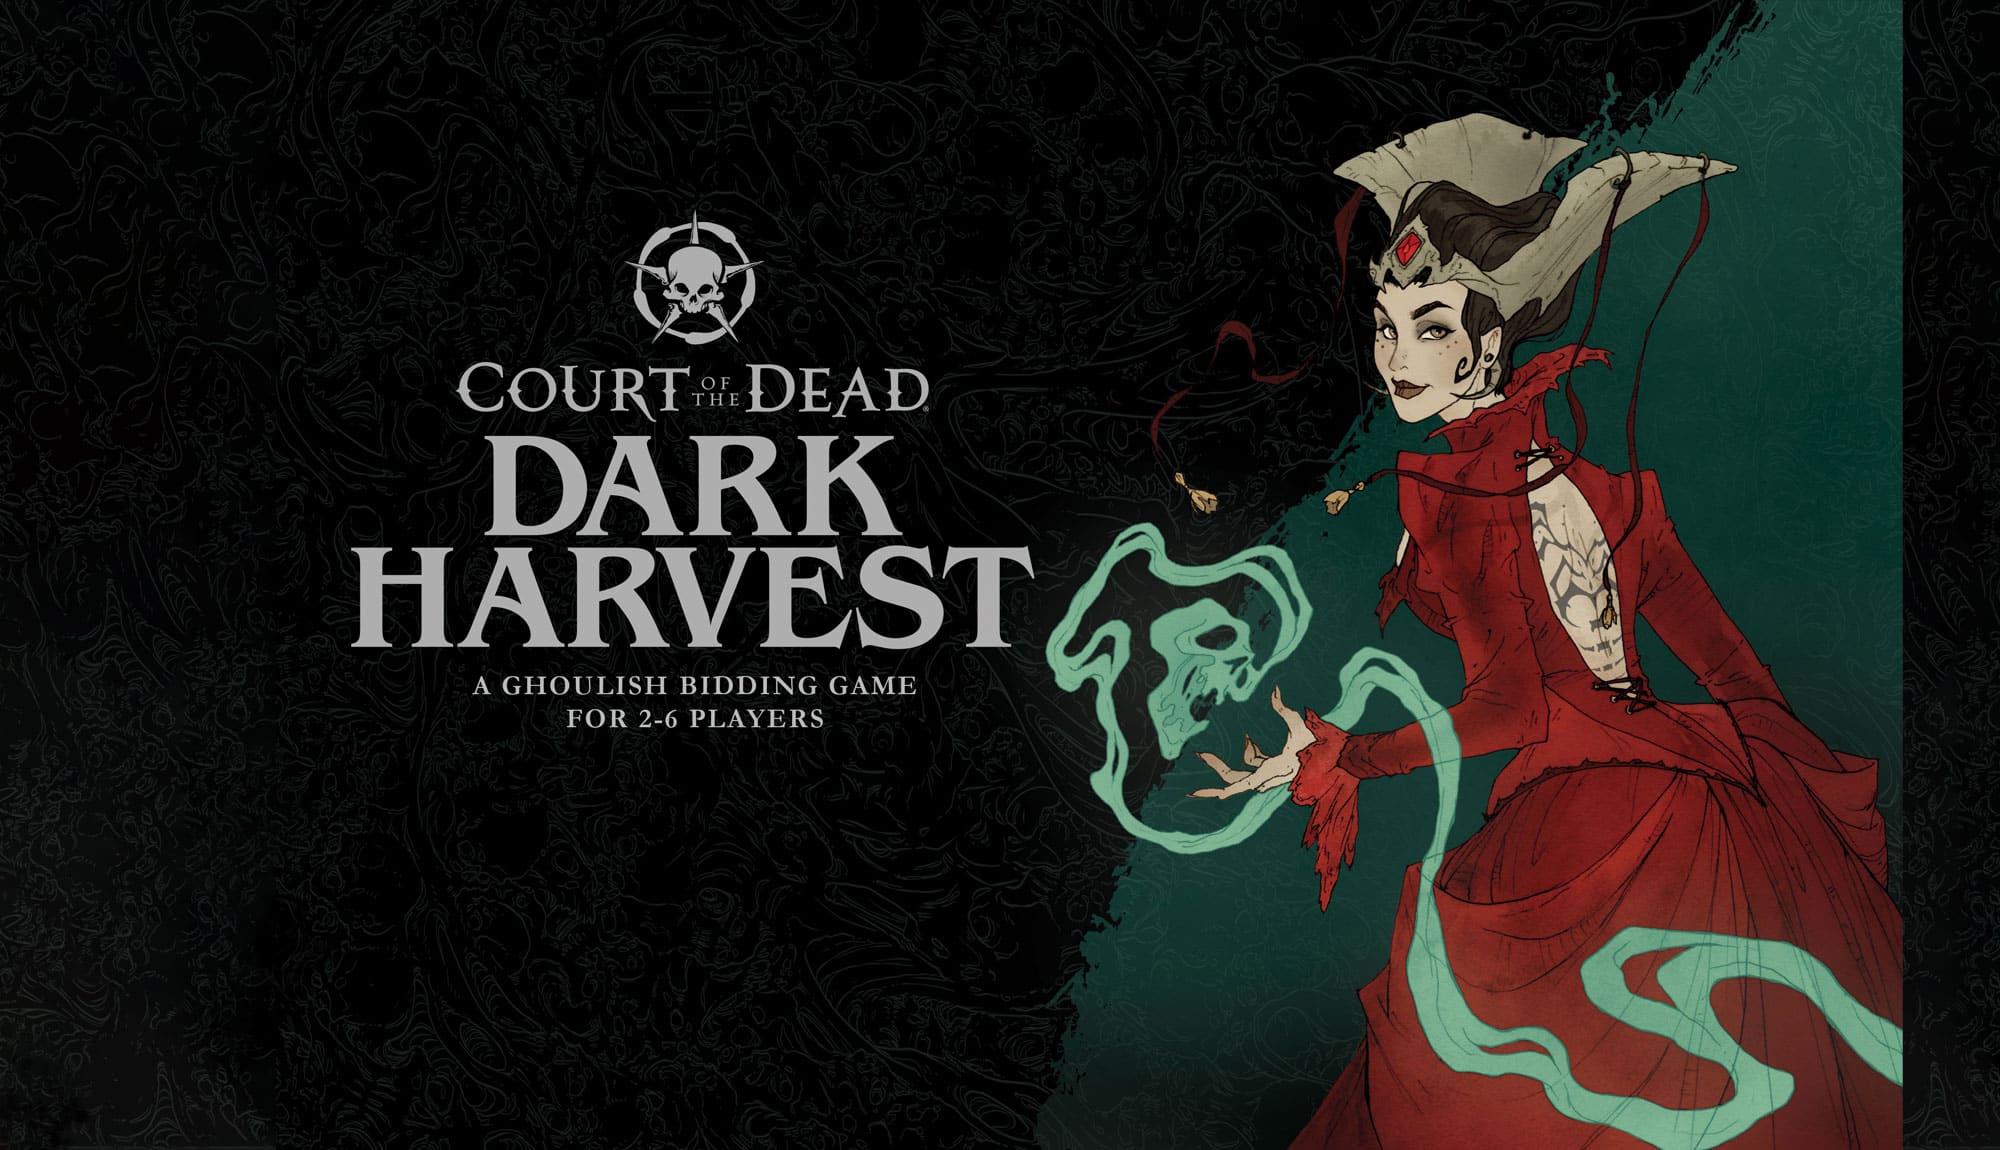 We’re Developing Court of the Dead Games with Sideshow Collectibles!